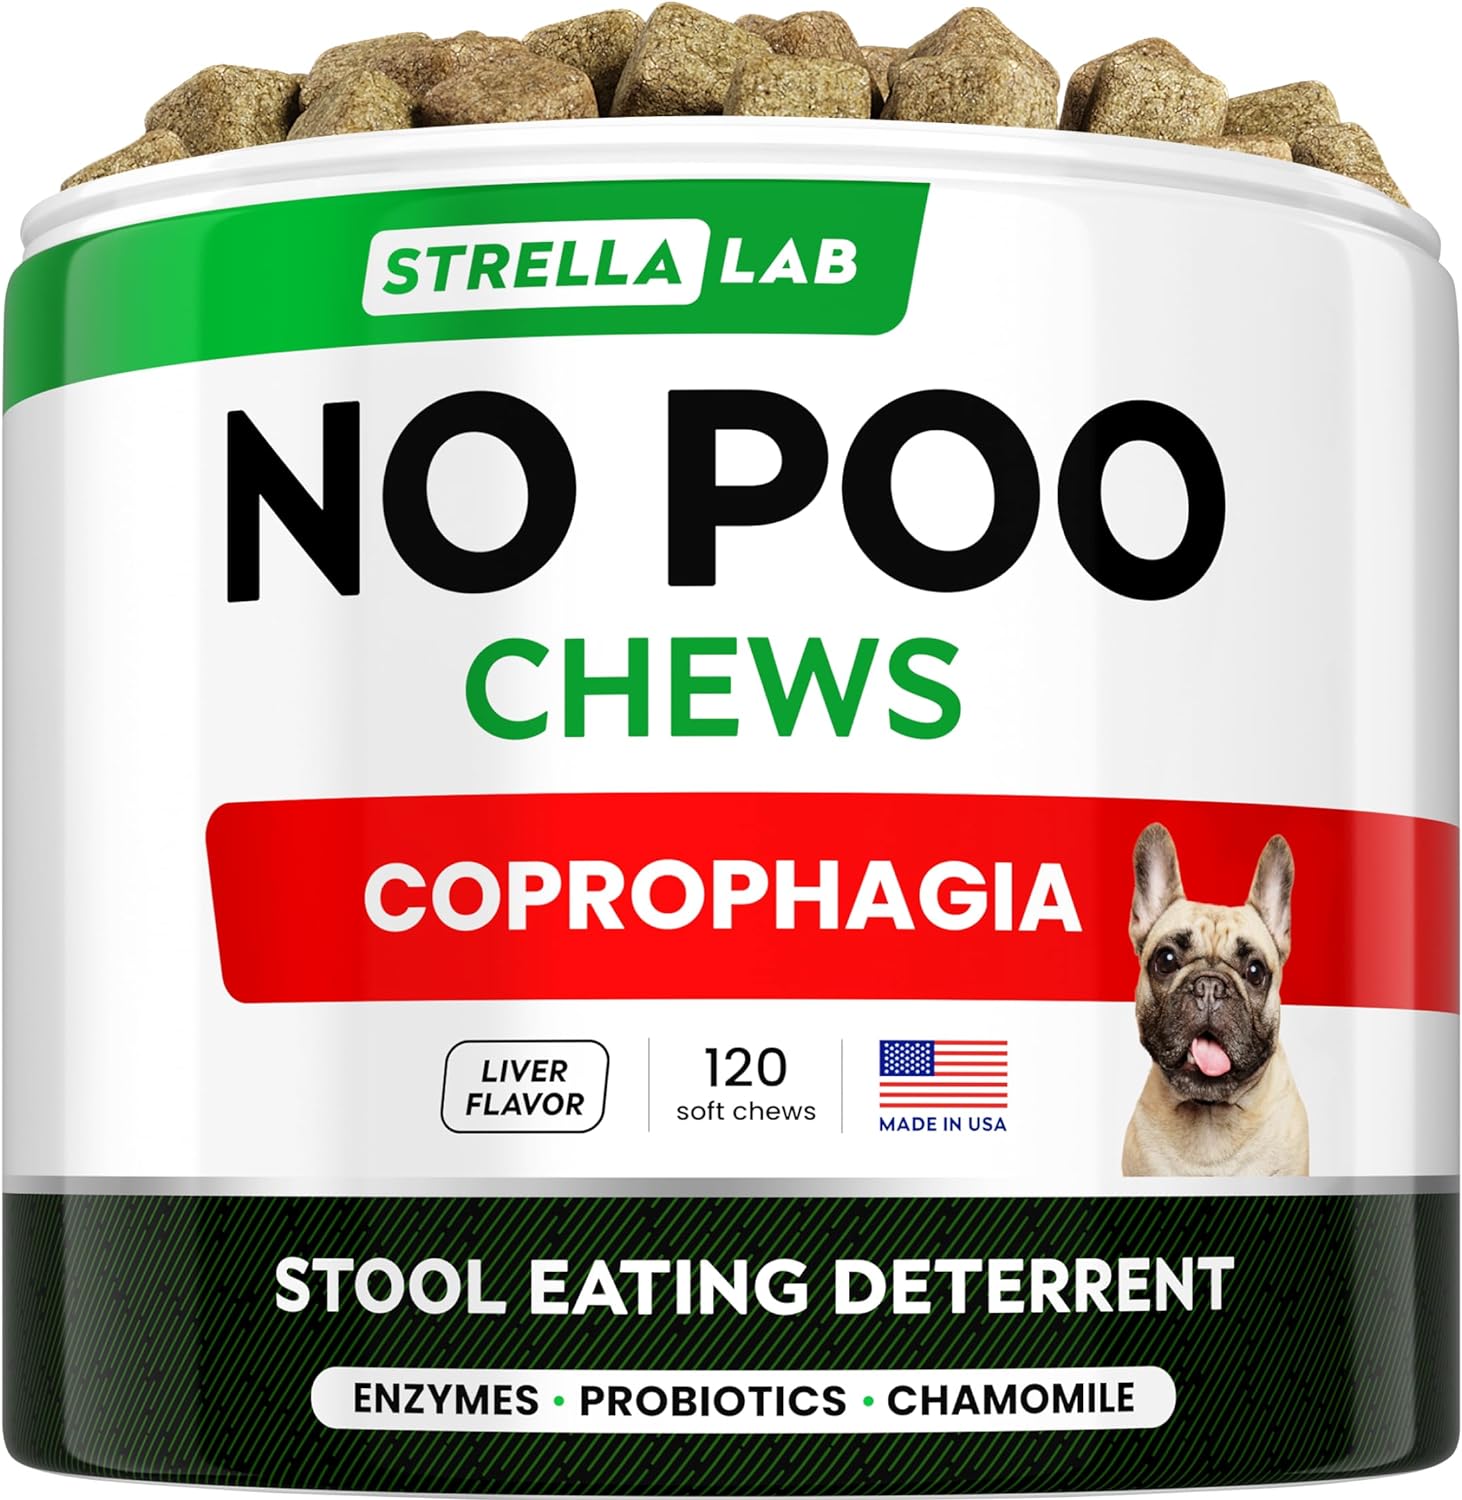 STRELLALAB No Poo Chews for Dogs - Coprophagia Stool Eating Deterrent - No Poop Eating for Dogs - Digestive Enzymes - Gut Health & Immune Support - Stop Eating Poop - Chicken Liver Flavor 120 Chews